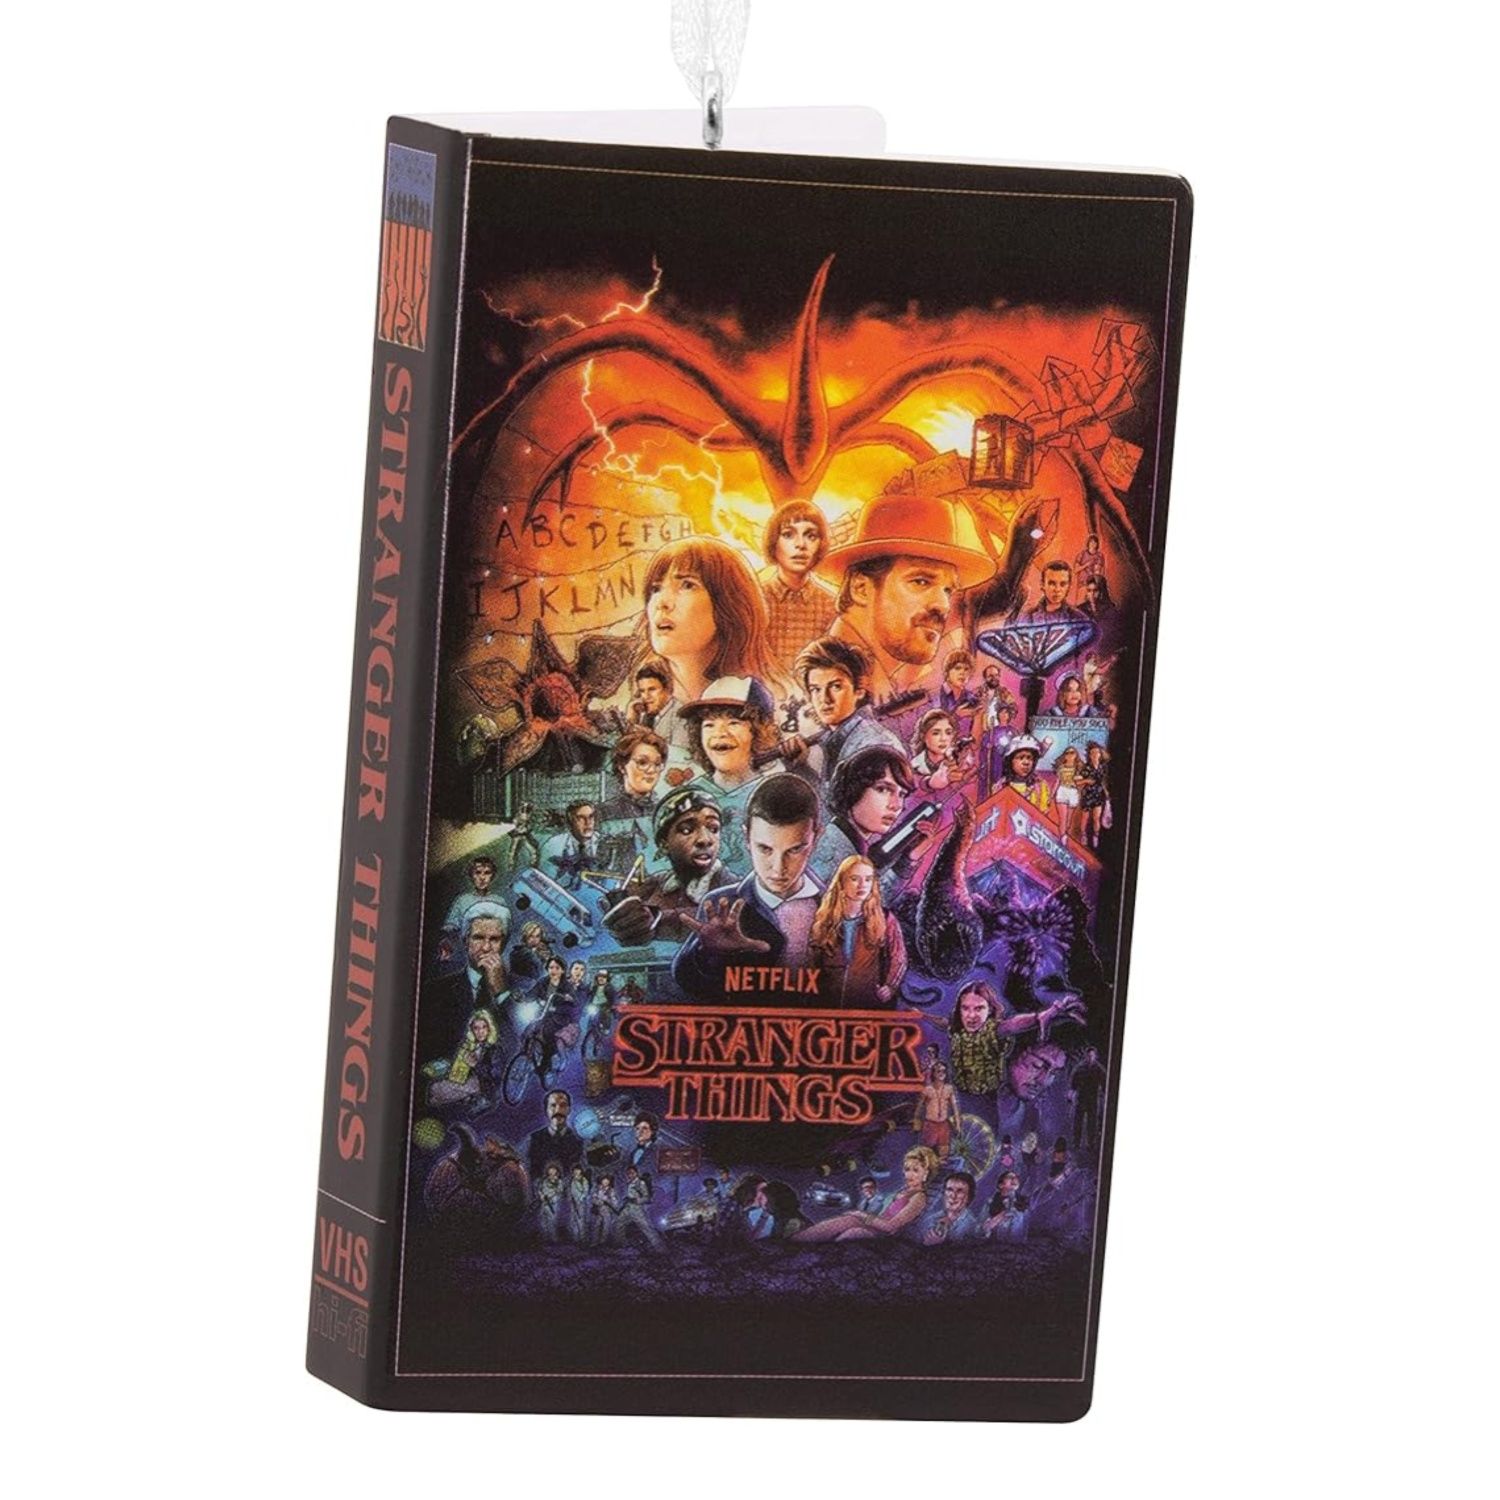 This ornament is of a VHS tape box with the cast of Stranger Things printed on it